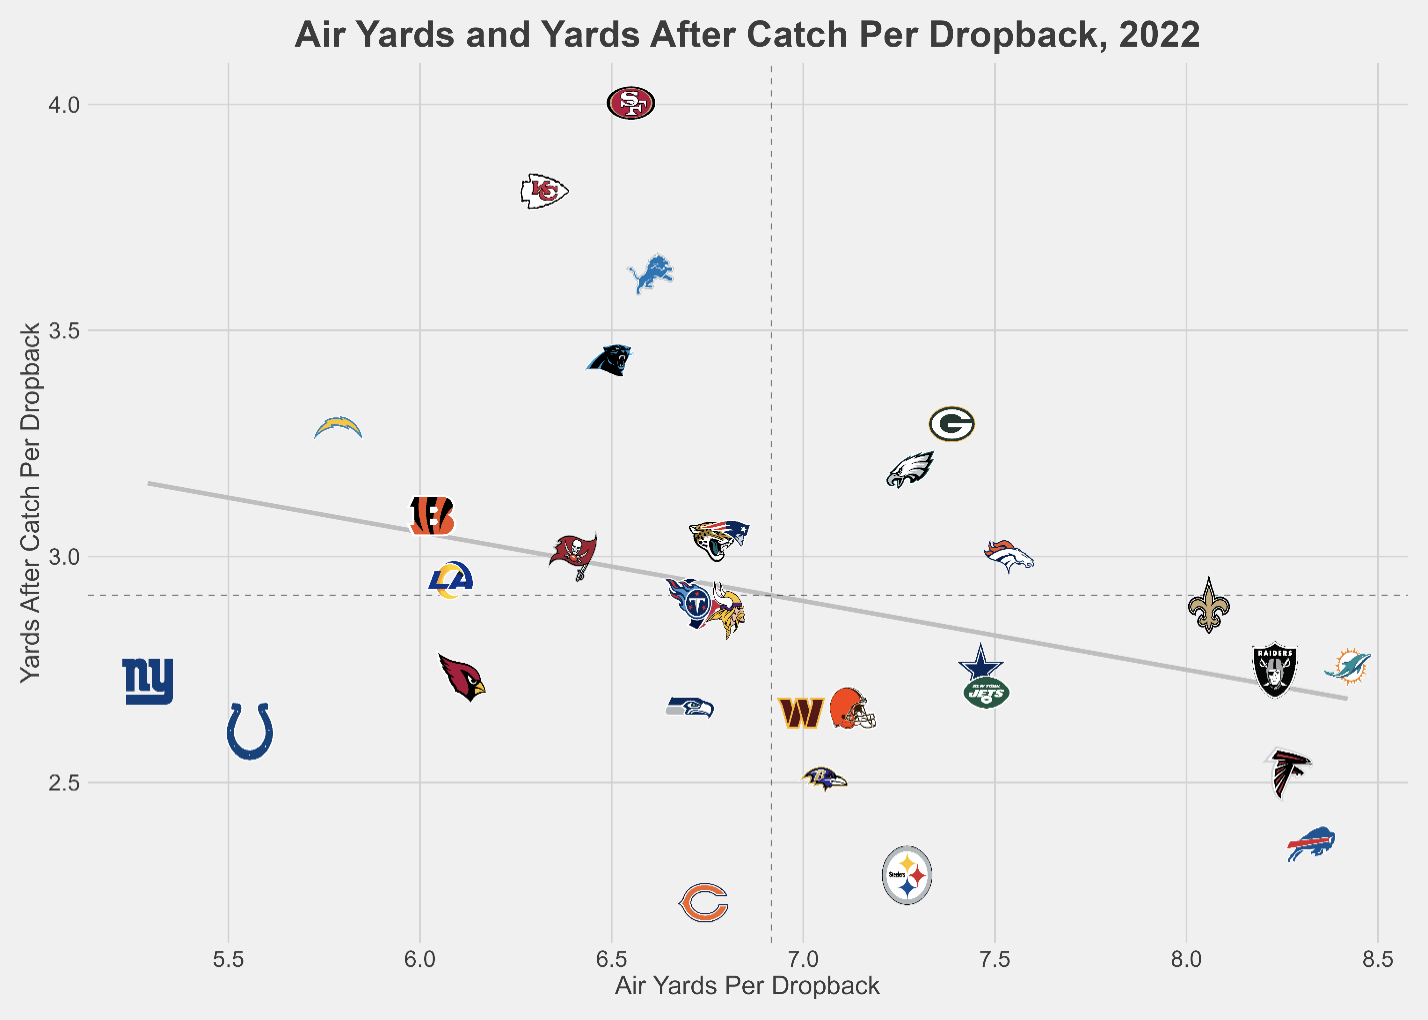 Chart: Air Yards and Yards After Catch Per Dropback, 2022